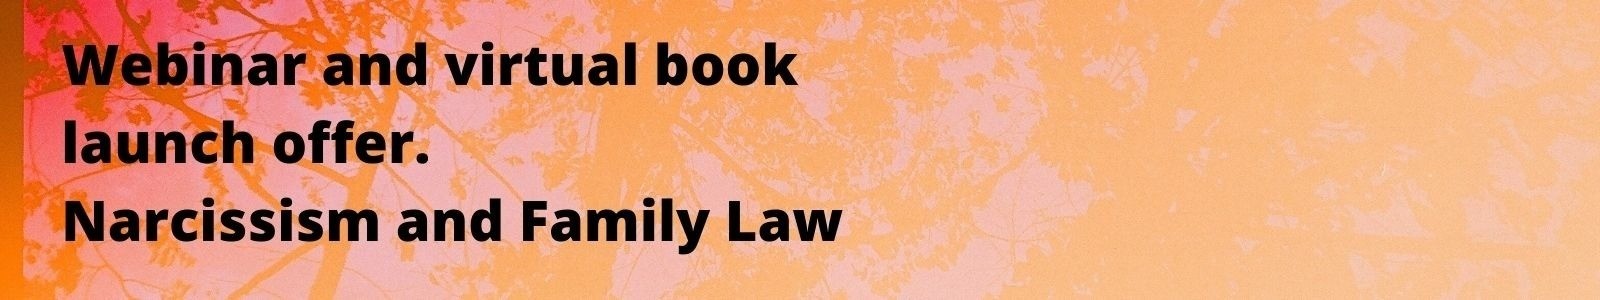 Webinar and Book Launch: Narcissistic Clients: Tips, trips & strategies for the family lawyer